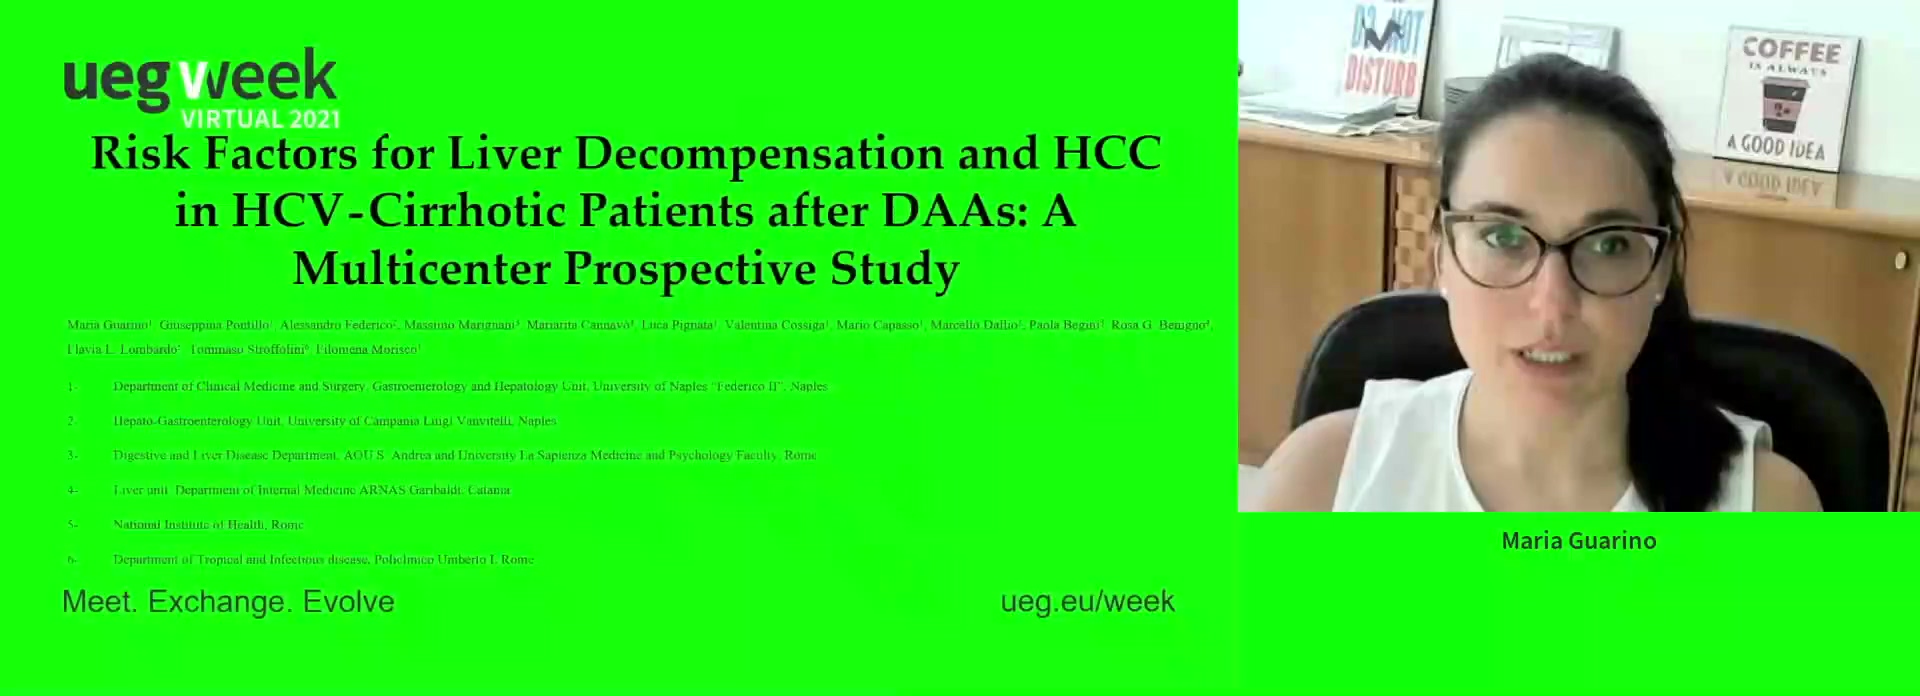 RISK FACTORS FOR LIVER DECOMPENSATION AND HCC IN HCV-CIRRHOTIC PATIENTS AFTER DAAS: A MULTICENTER PROSPECTIVE STUDY